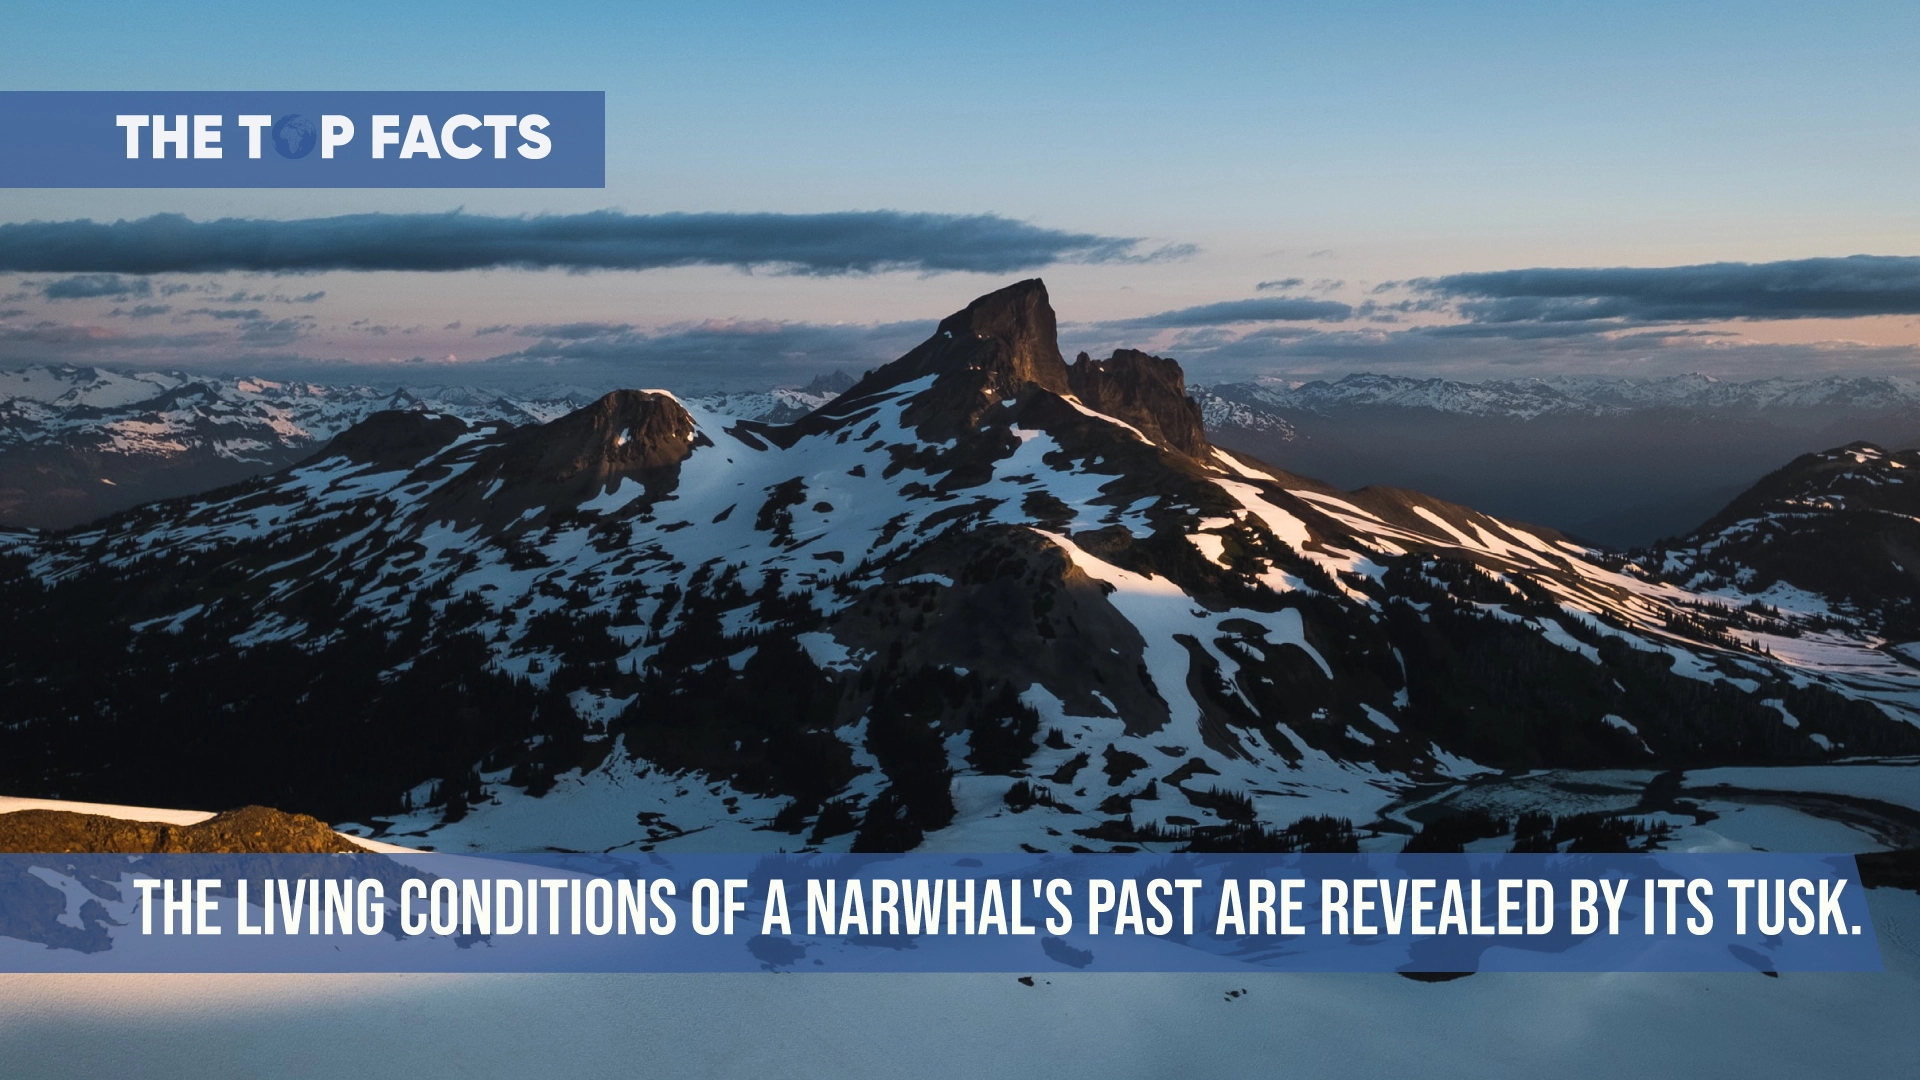 The living conditions of a narwhal's past are revealed by its tusk